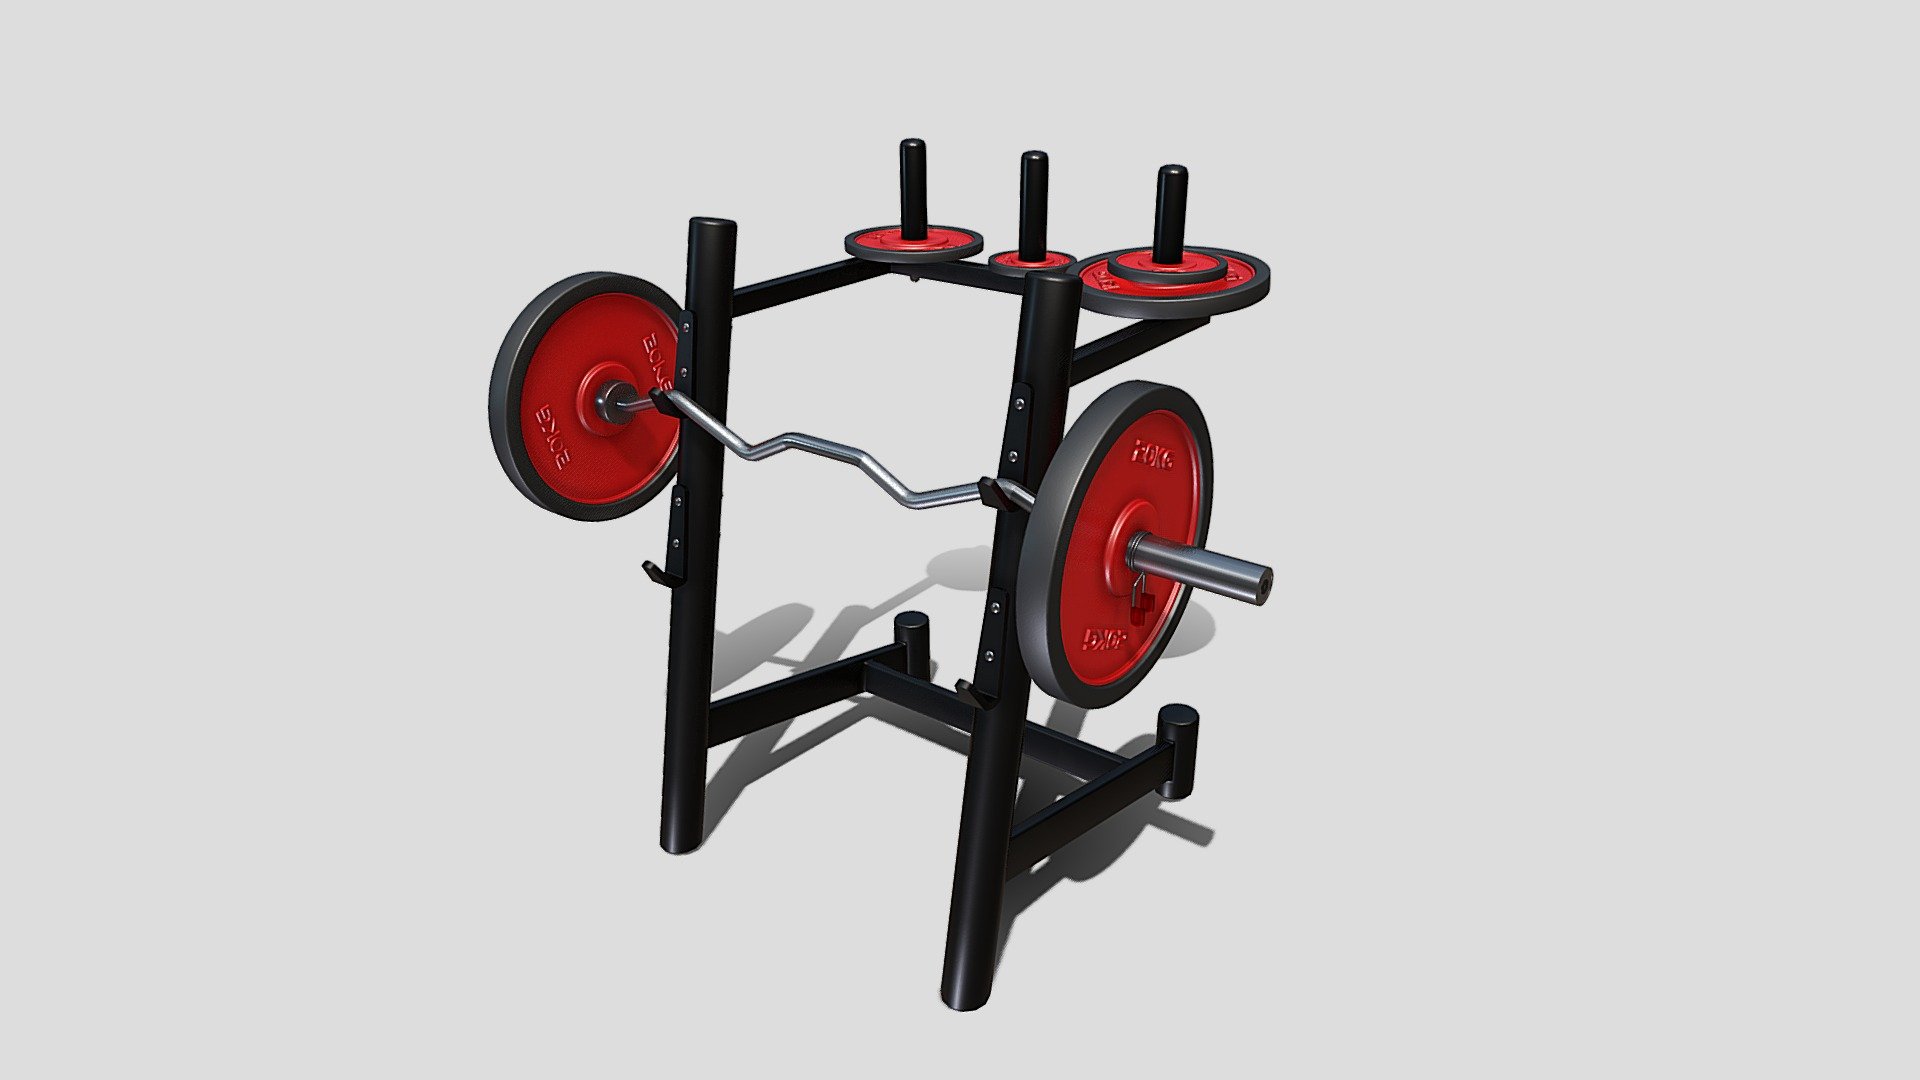 Gym machine 3d model built to real size, rendered with Cycles in Blender, as per seen on attached images. 

File formats:
-.blend, rendered with cycles, as seen in the images;
-.obj, with materials applied;
-.dae, with materials applied;
-.fbx, with materials applied;
-.stl;
Files come named appropriately and split by file format.
3D Software:
The 3D model was originally created in Blender 3.1 and rendered with Cycles.

Materials and textures:
The models have materials applied in all formats, and are ready to import and render.
Materials are image based using PBR, the model comes with four 4k png image textures for the rack, and four 1k textures for the disks.

Preview scenes:
The preview images are rendered in Blender using its built-in render engine &lsquo;Cycles'.
Note that the blend files come directly with the rendering scene included and the render command will generate the exact result as seen in previews 3d model